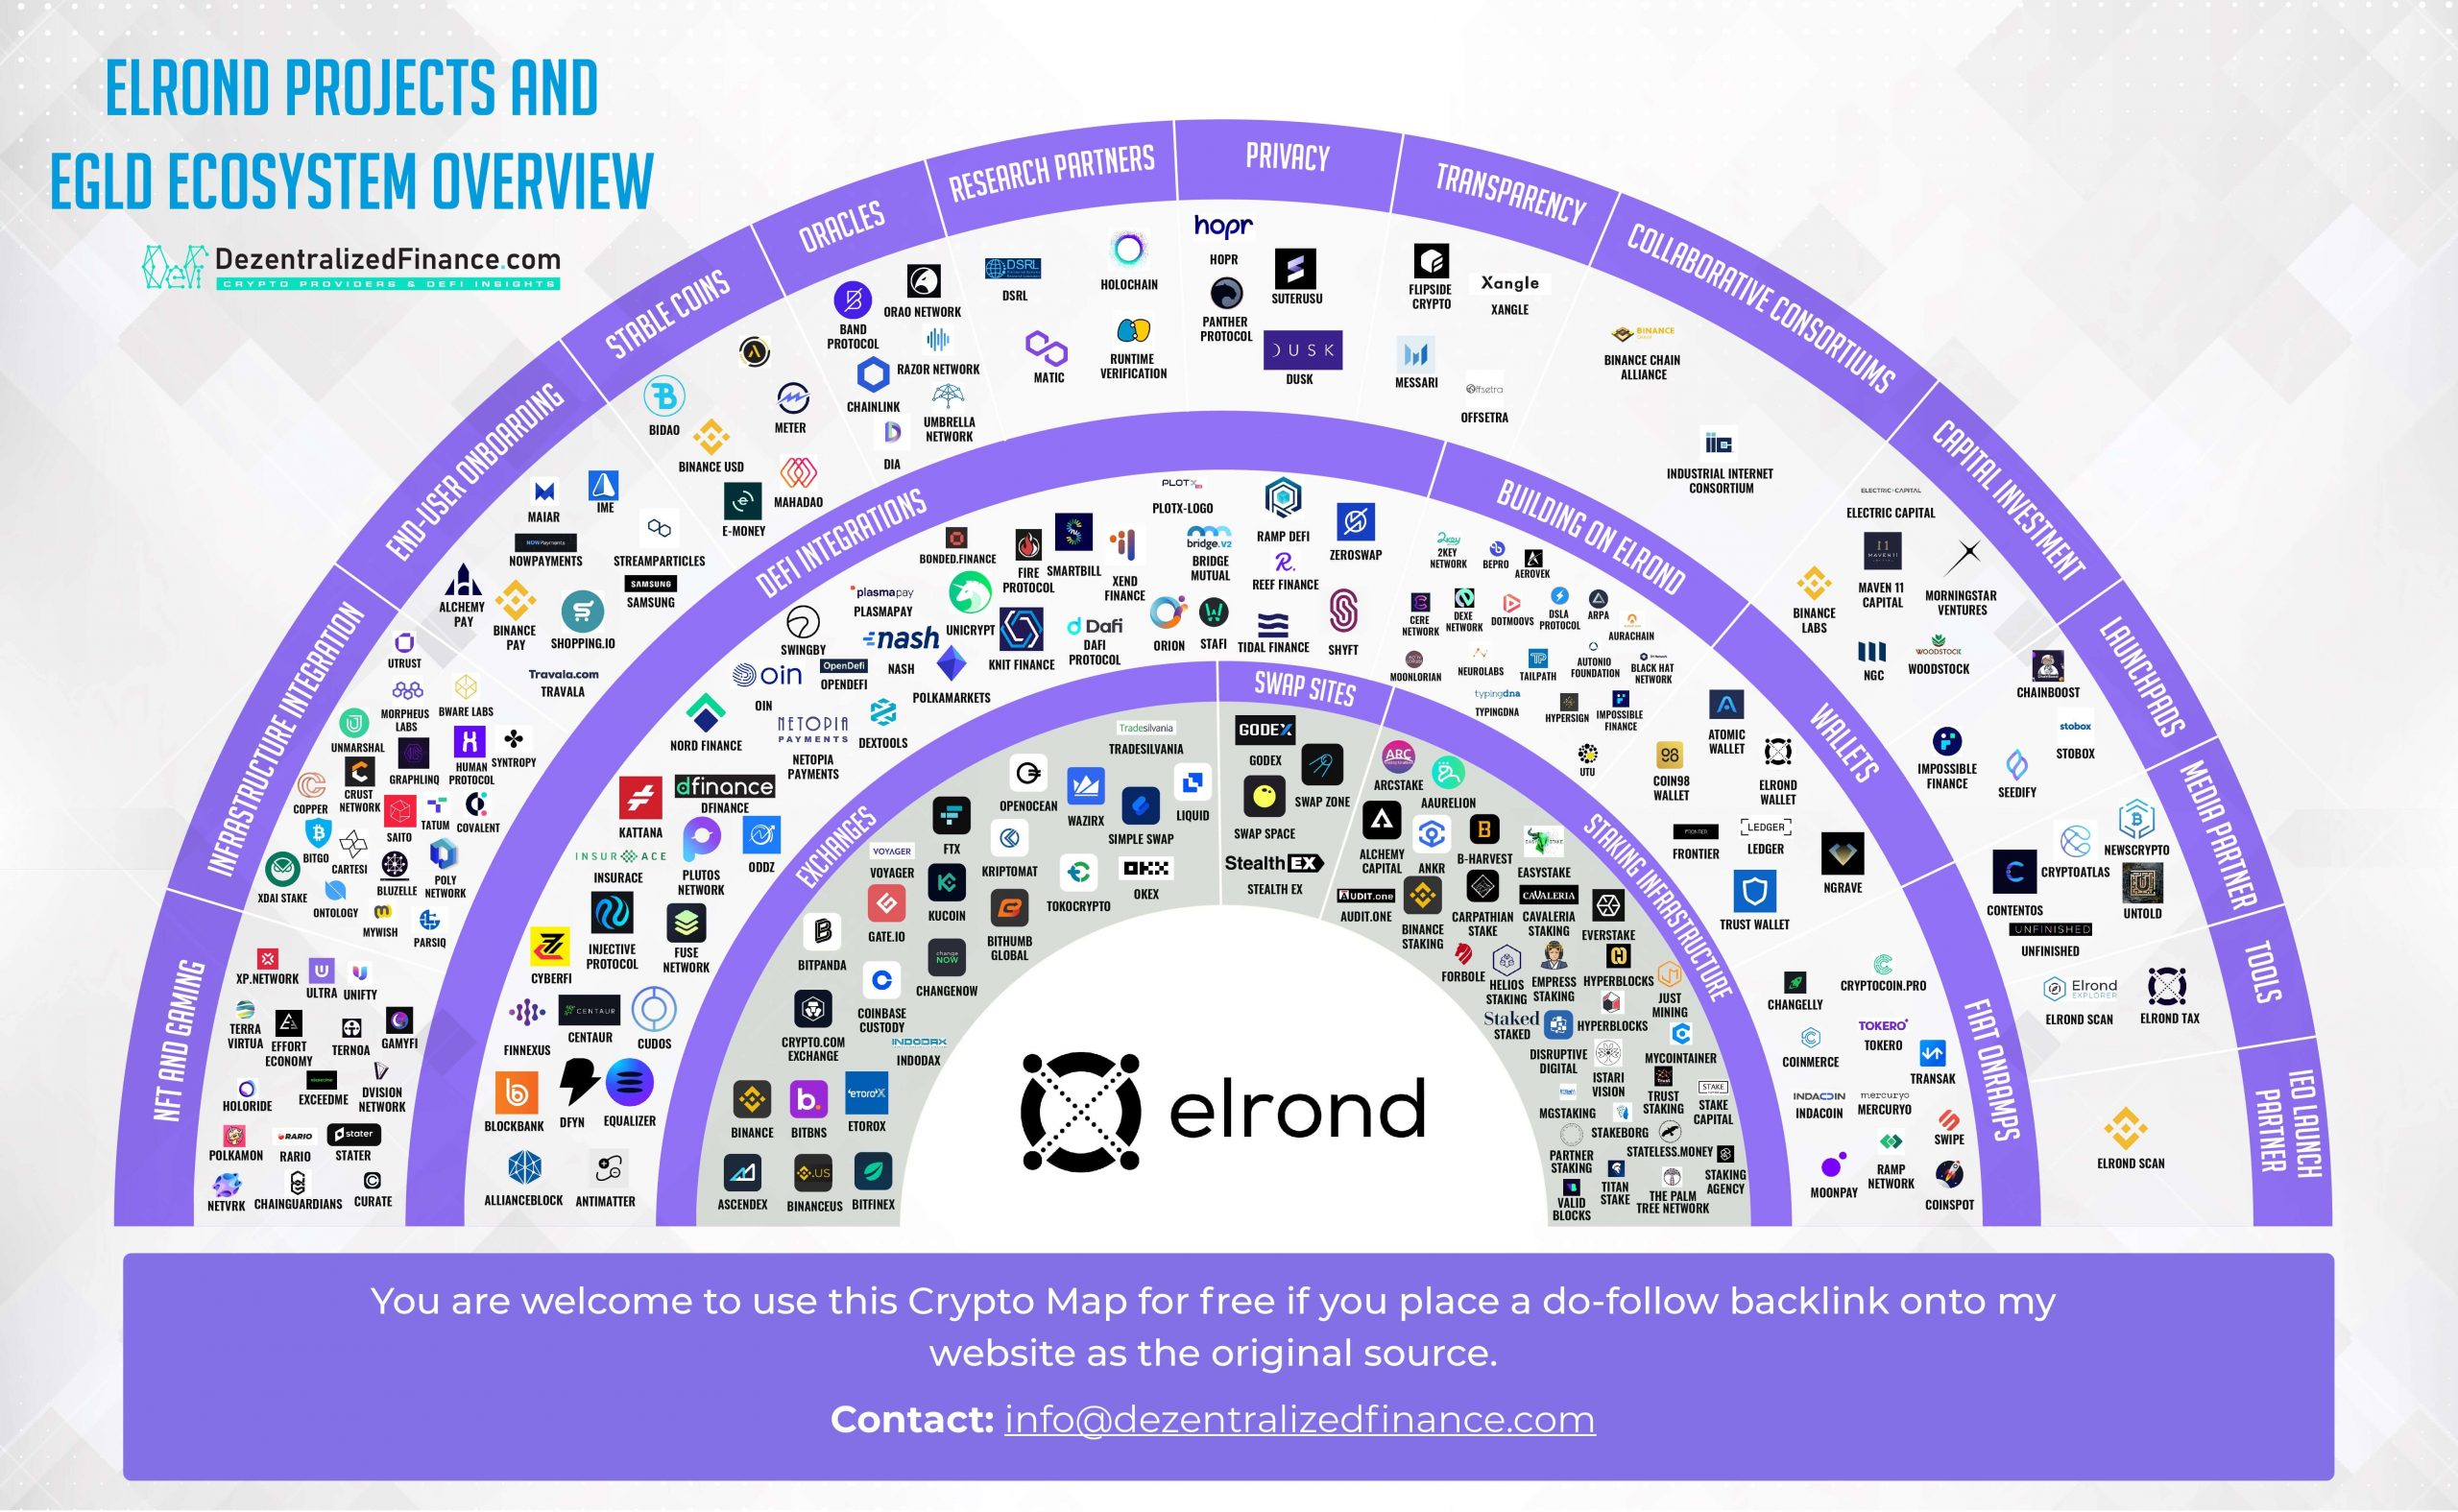 Elrond-Projects-and-EGLD-Ecosystem-Overview